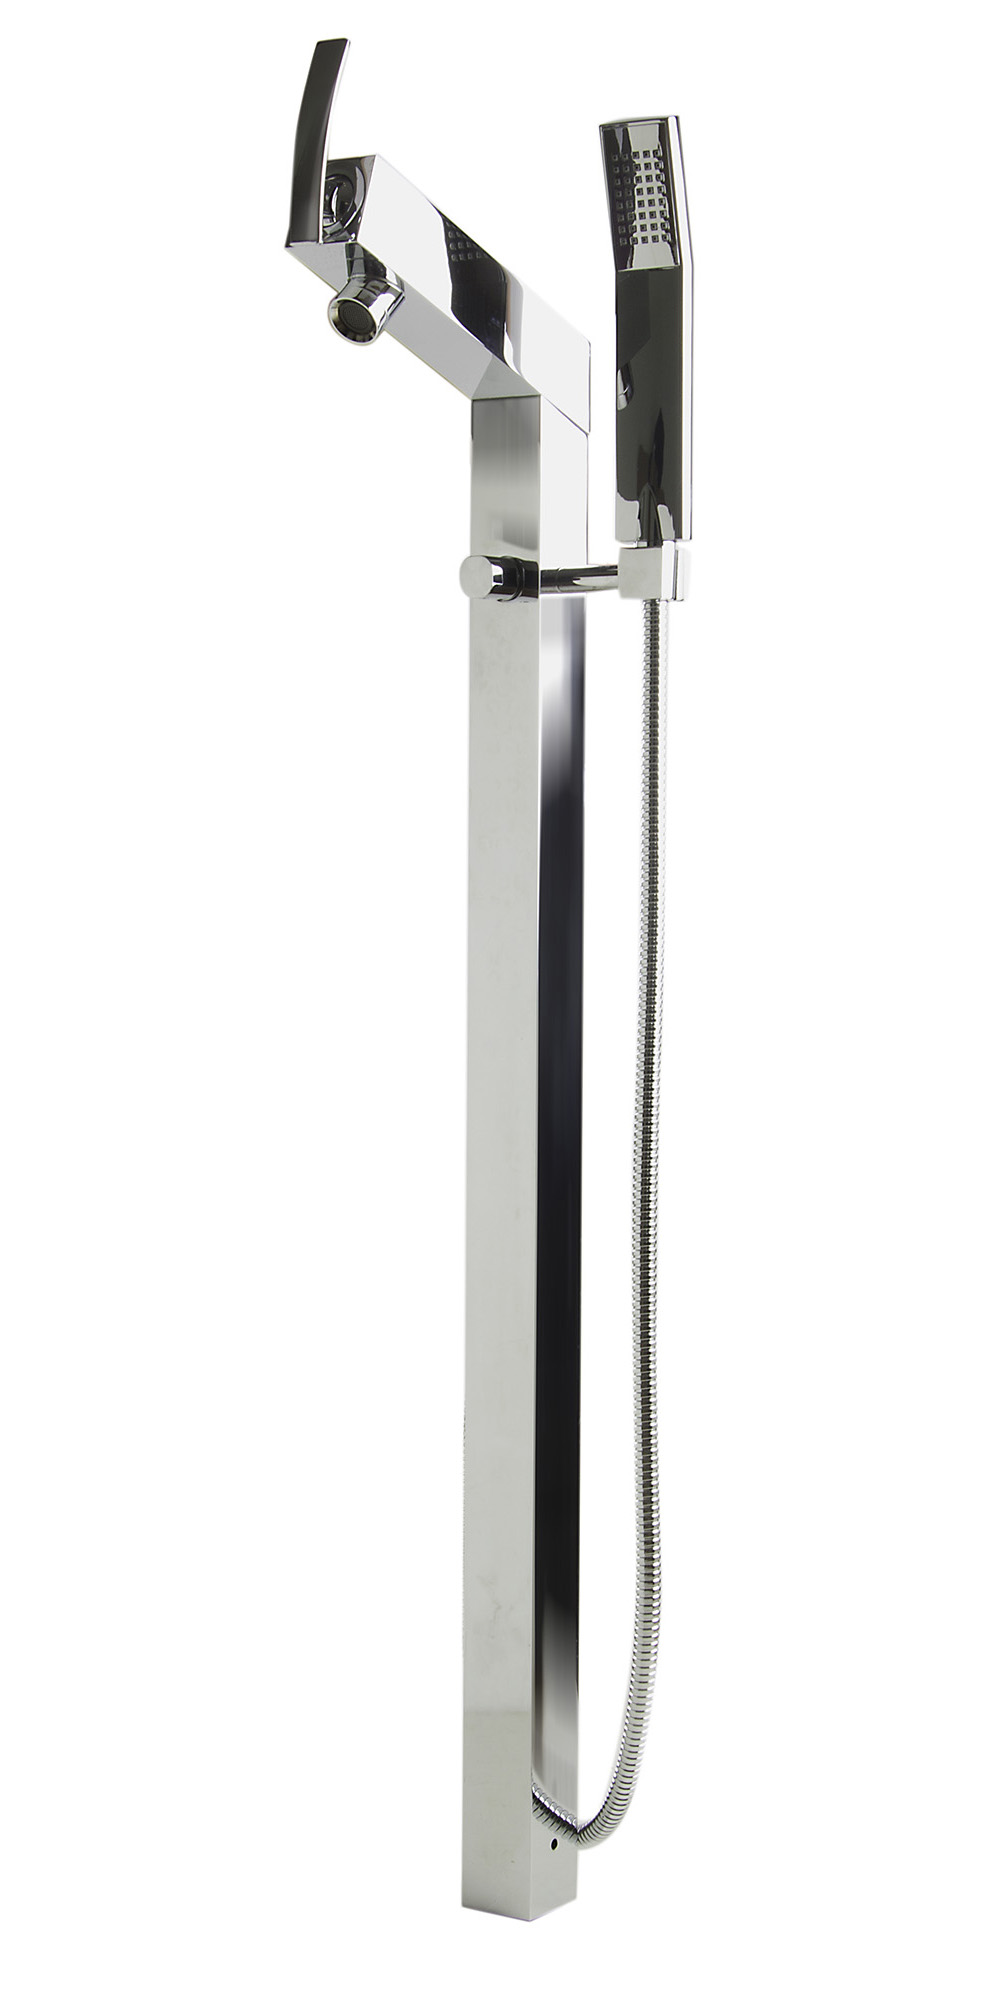 ALFI brand Brass, AB2728-PC Polished Chrome Floor Mounted Tub Filler + Mixer /w additional Hand Held Shower Head